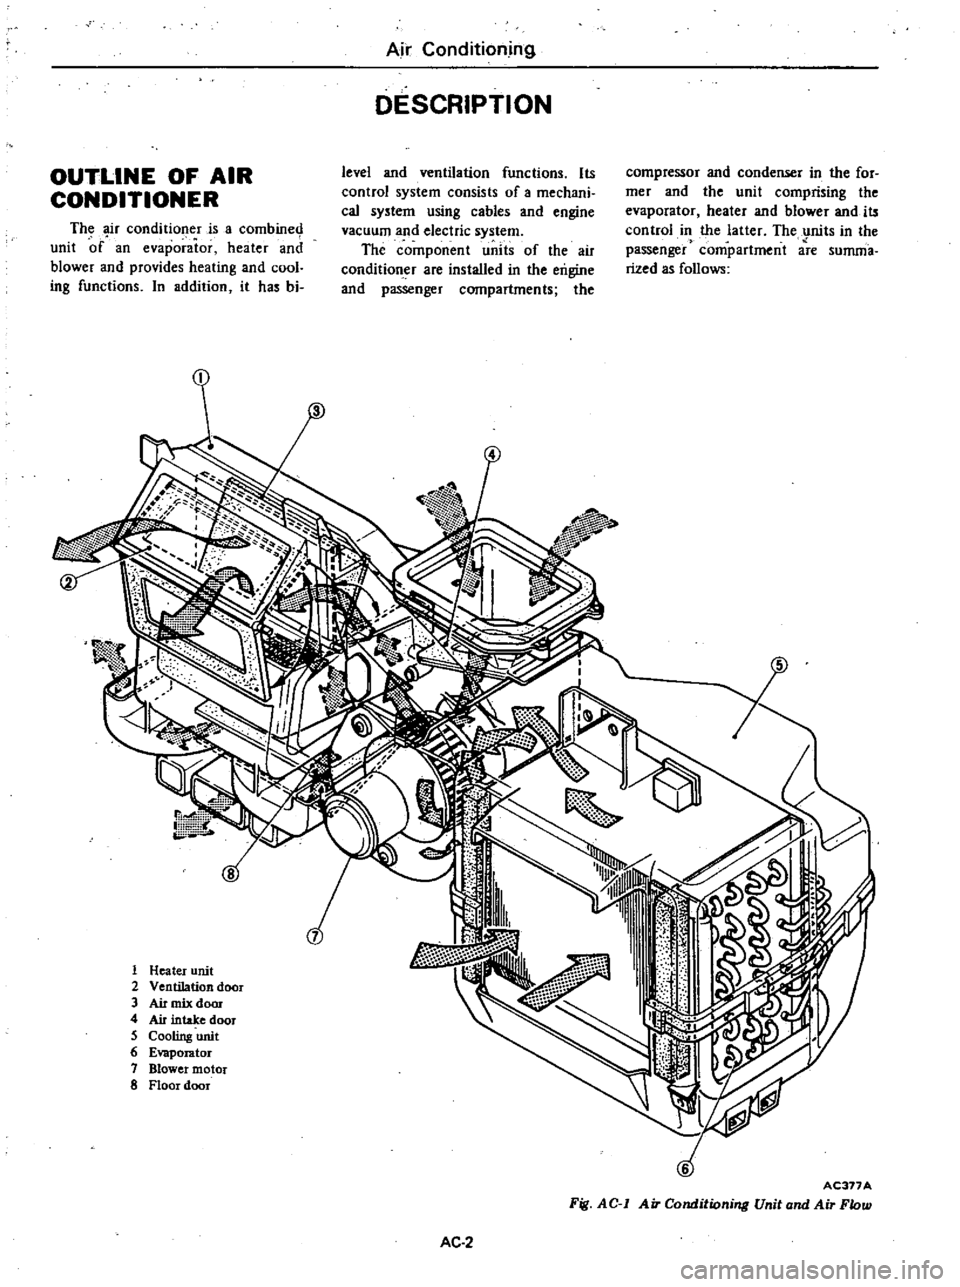 DATSUN 210 1979  Service Manual 
Air

Conditioning

DESCRIPTION

OUTLINE 
OF 
AIR

CONDITIONER 
level 
and

ventilation 
functions 
Its

control

system 
consists

of 
a 
mechani

cal

system

using 
cables 
and

engine

vacuum 
and